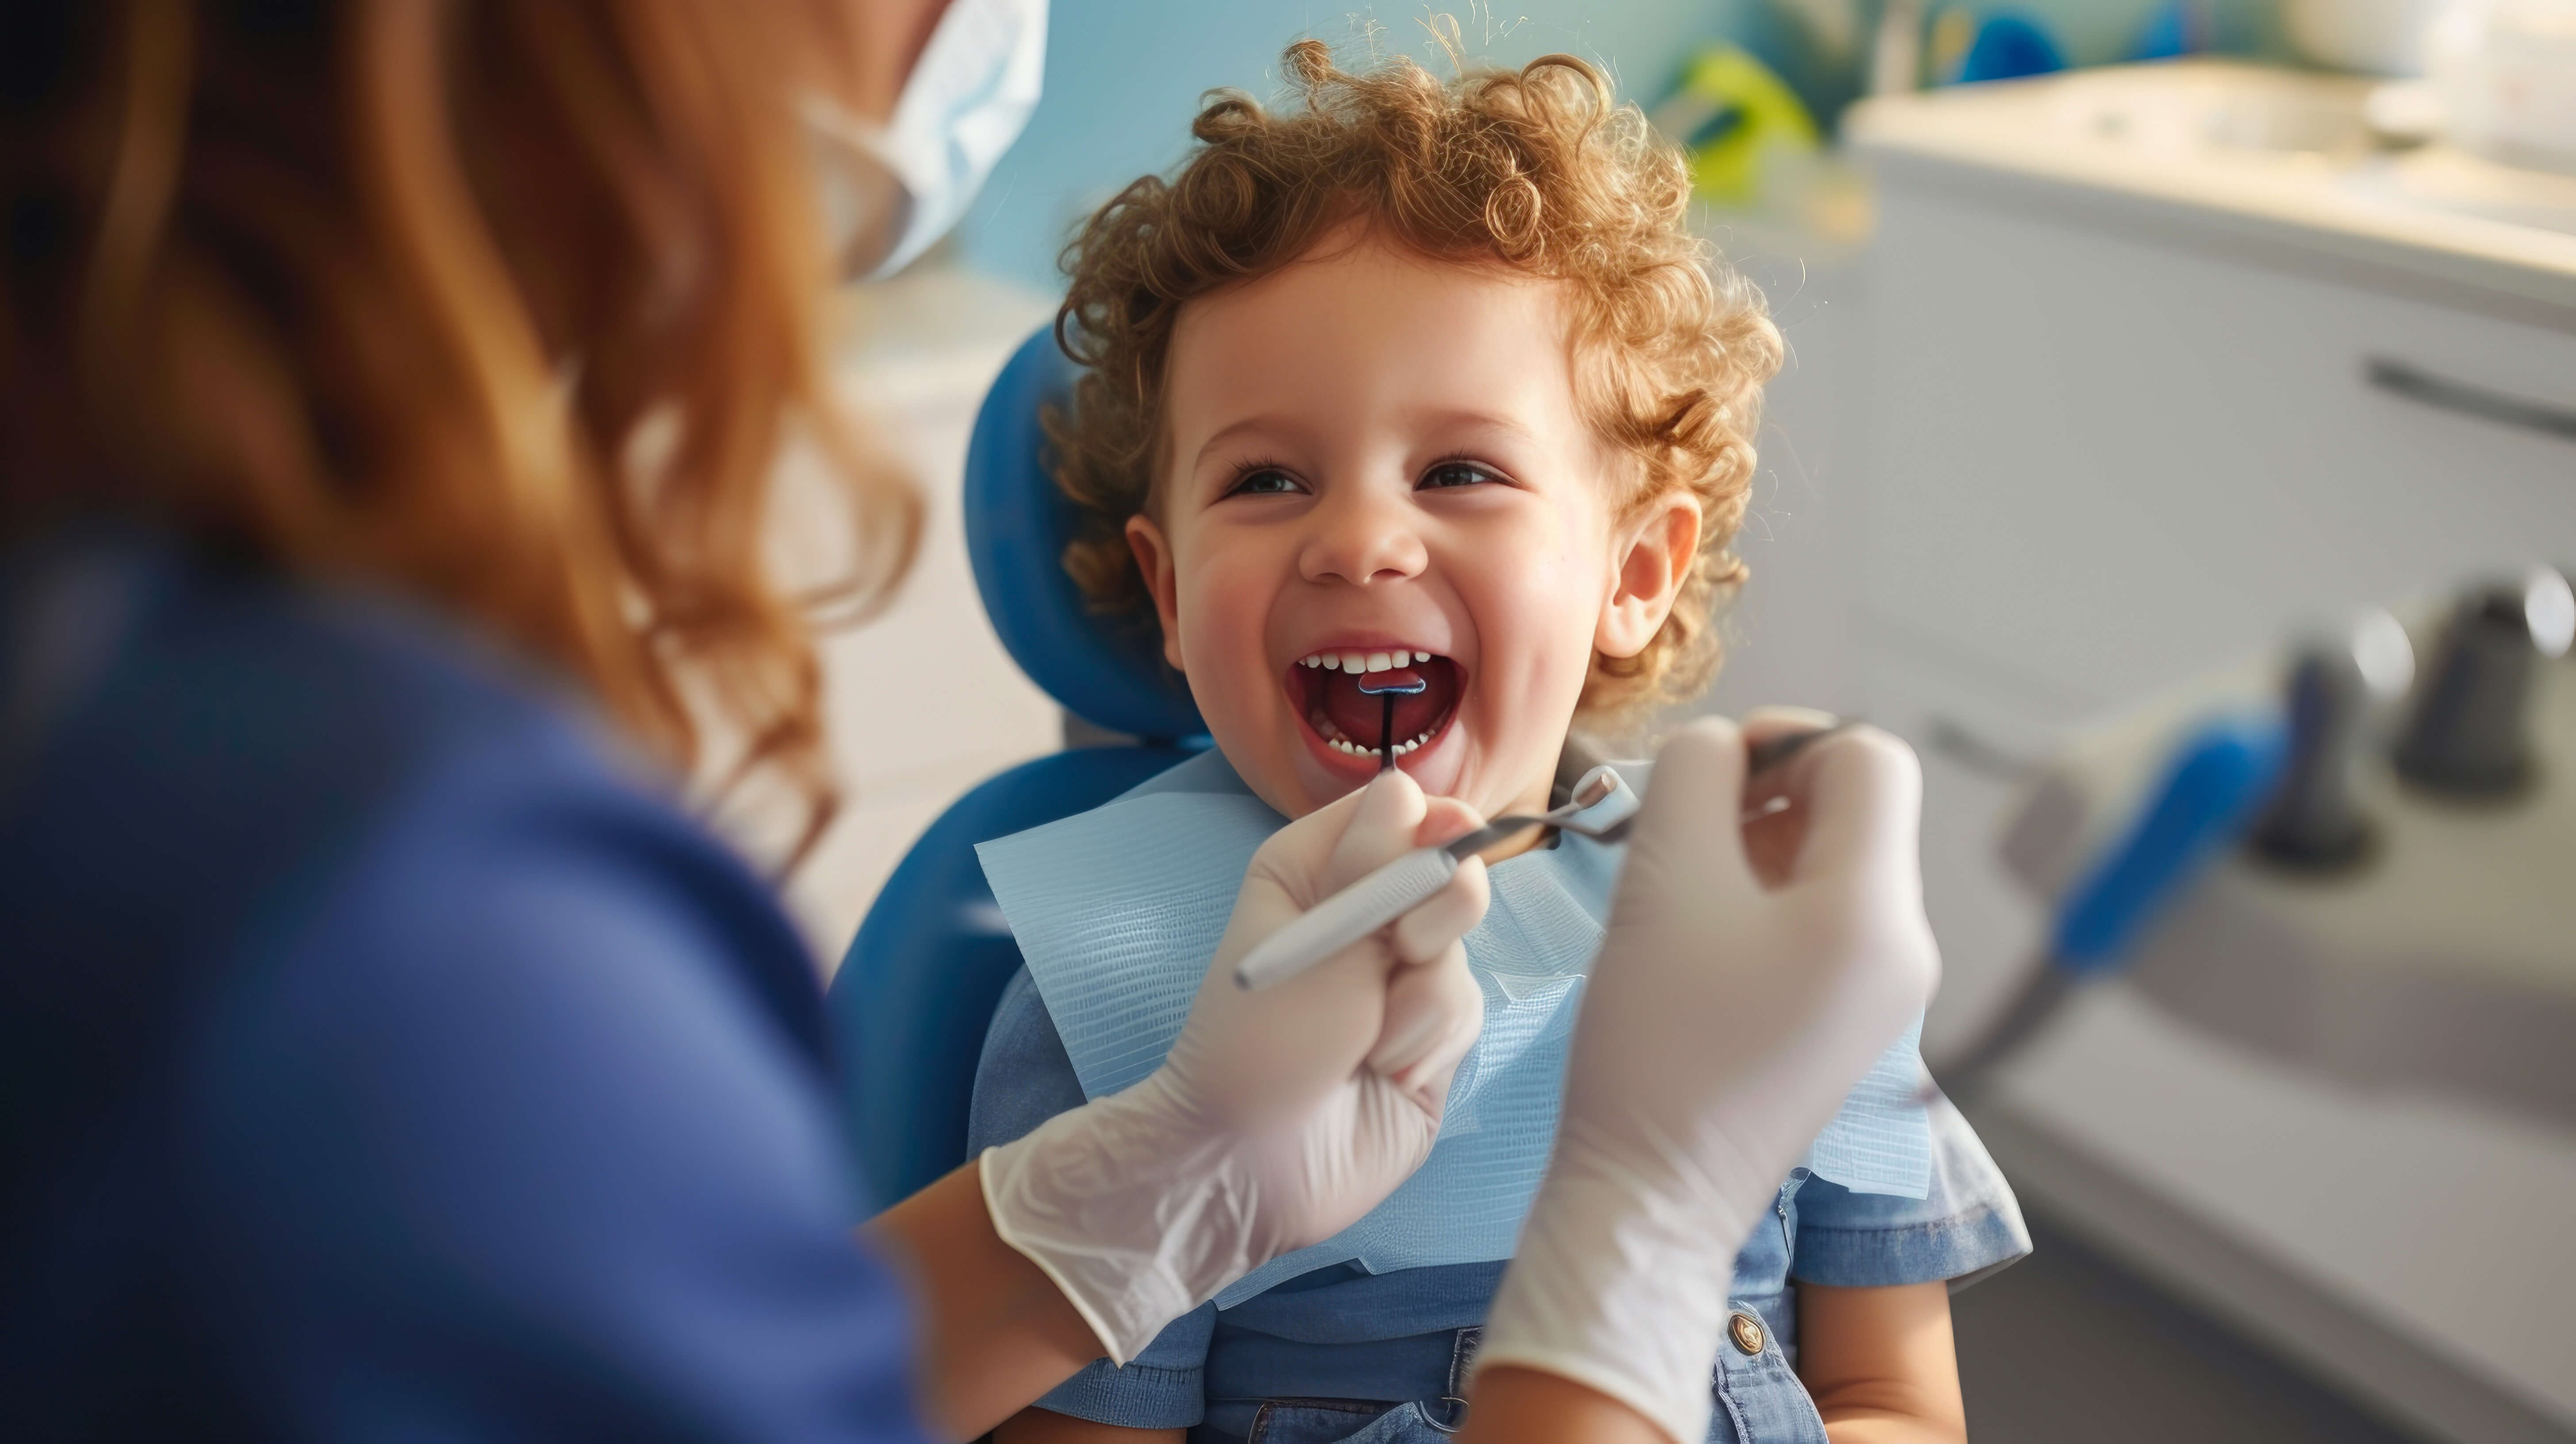 a child in a dental chair